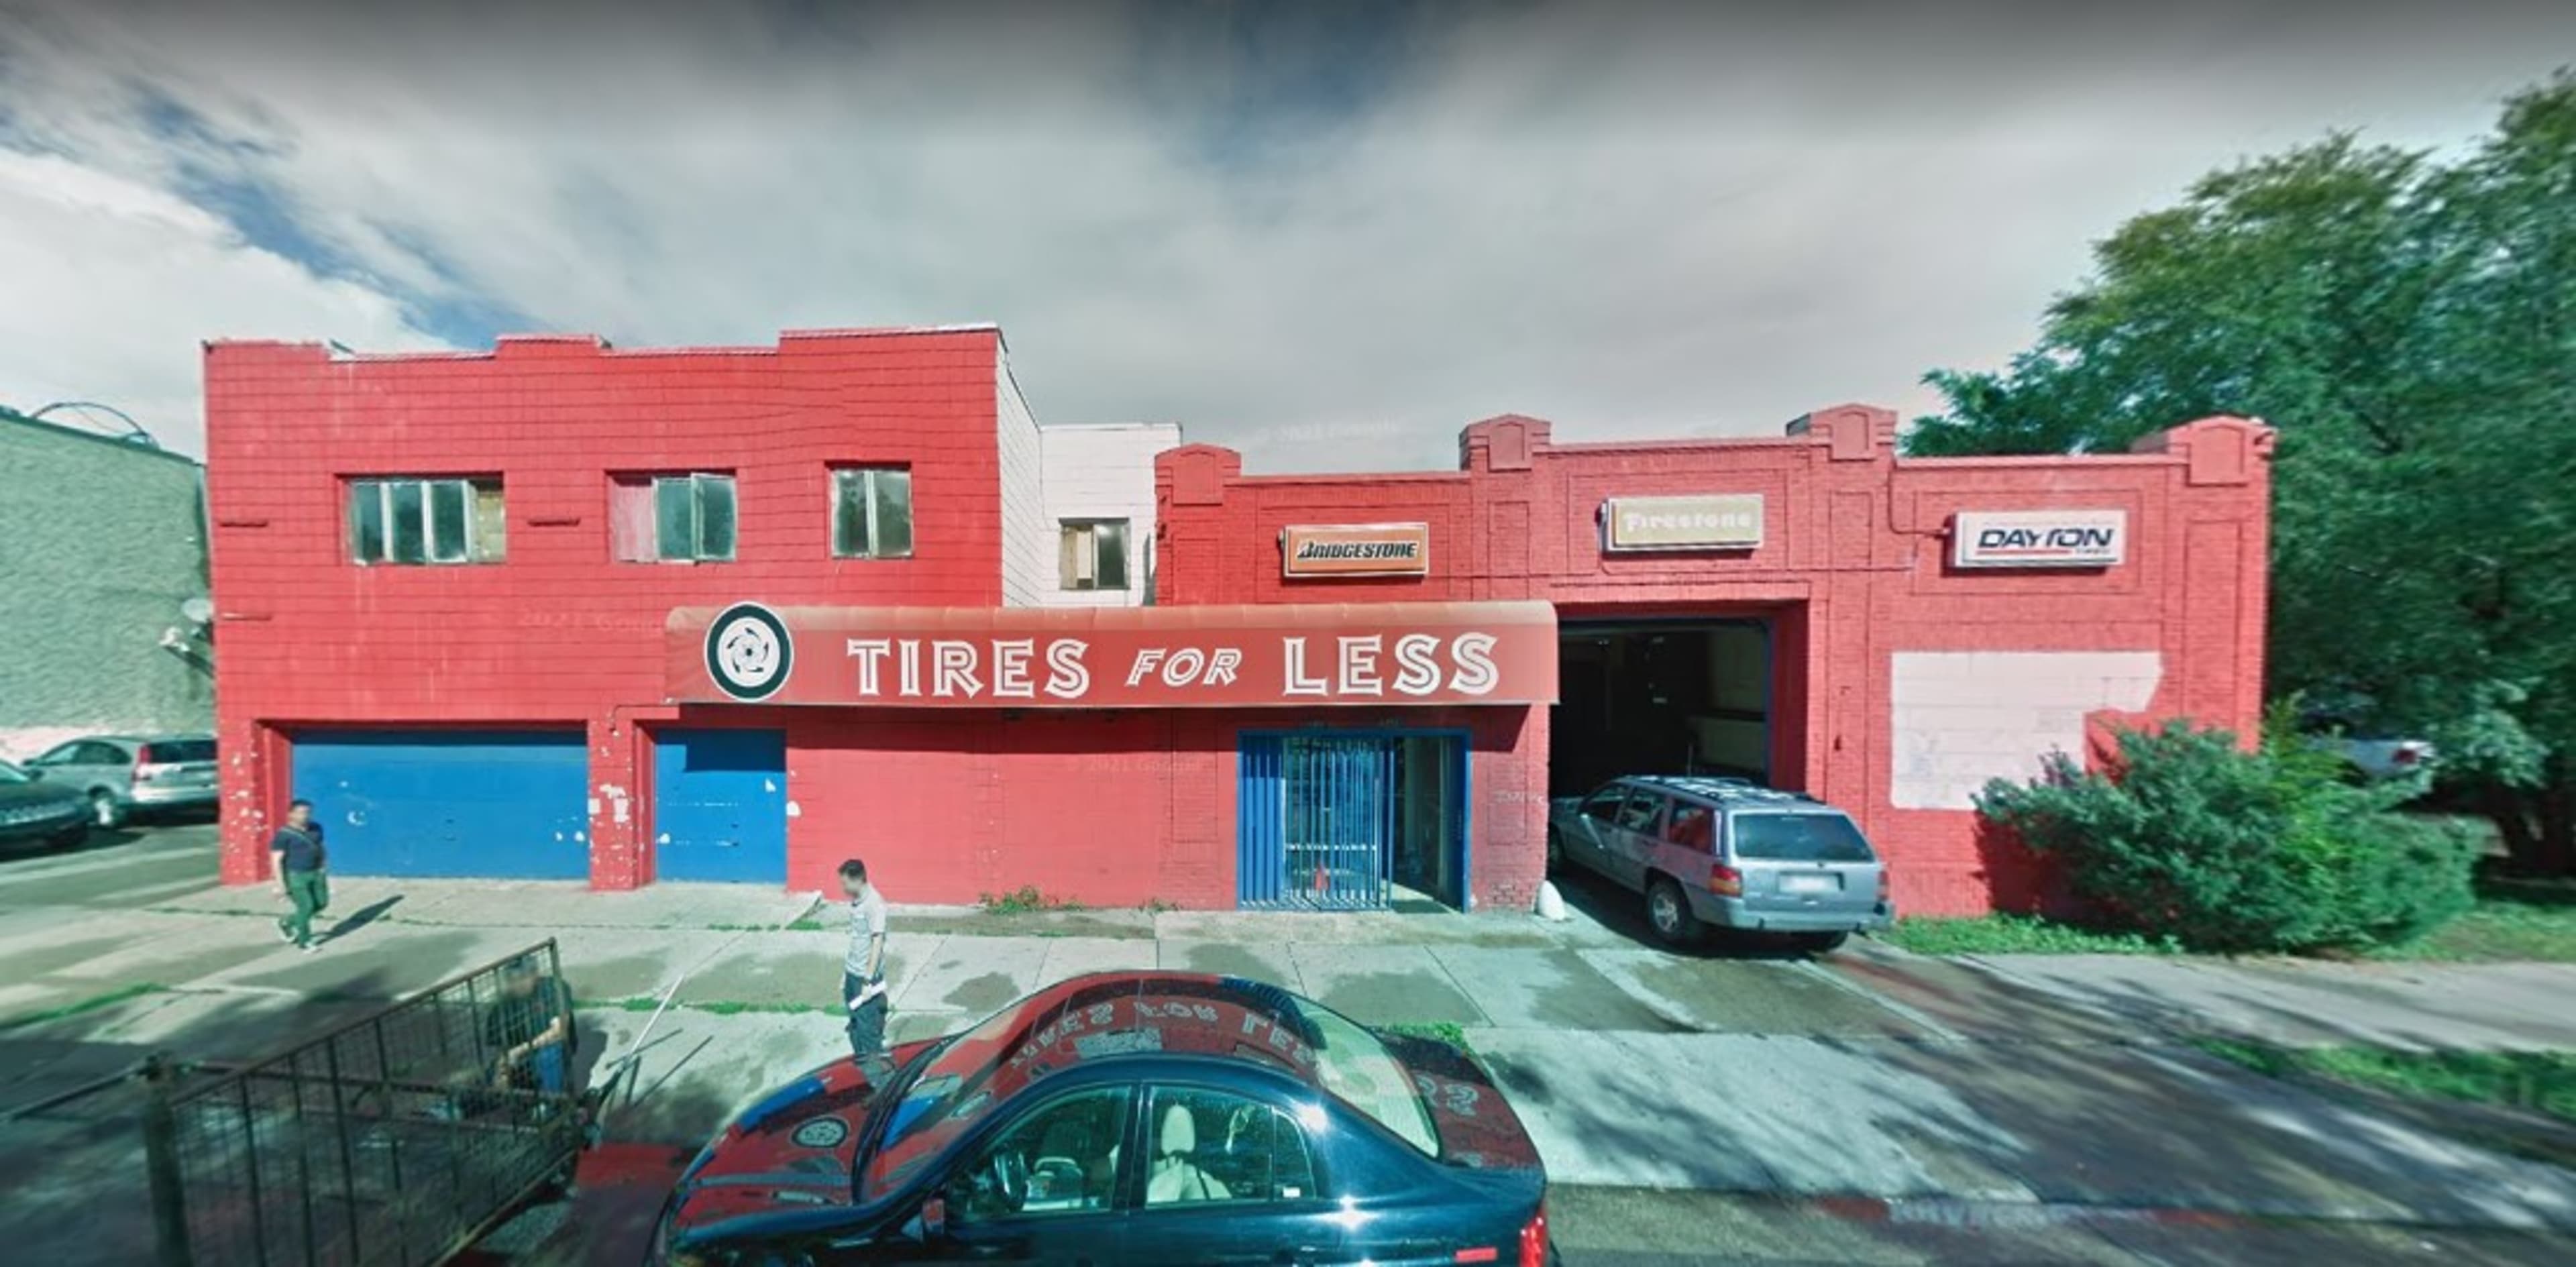 https://images.simpletire.com/images/f_auto,w_3840,q_auto/installer-images/84755/1/tires-for-less-minneapolis-mn-minnesota.jpg